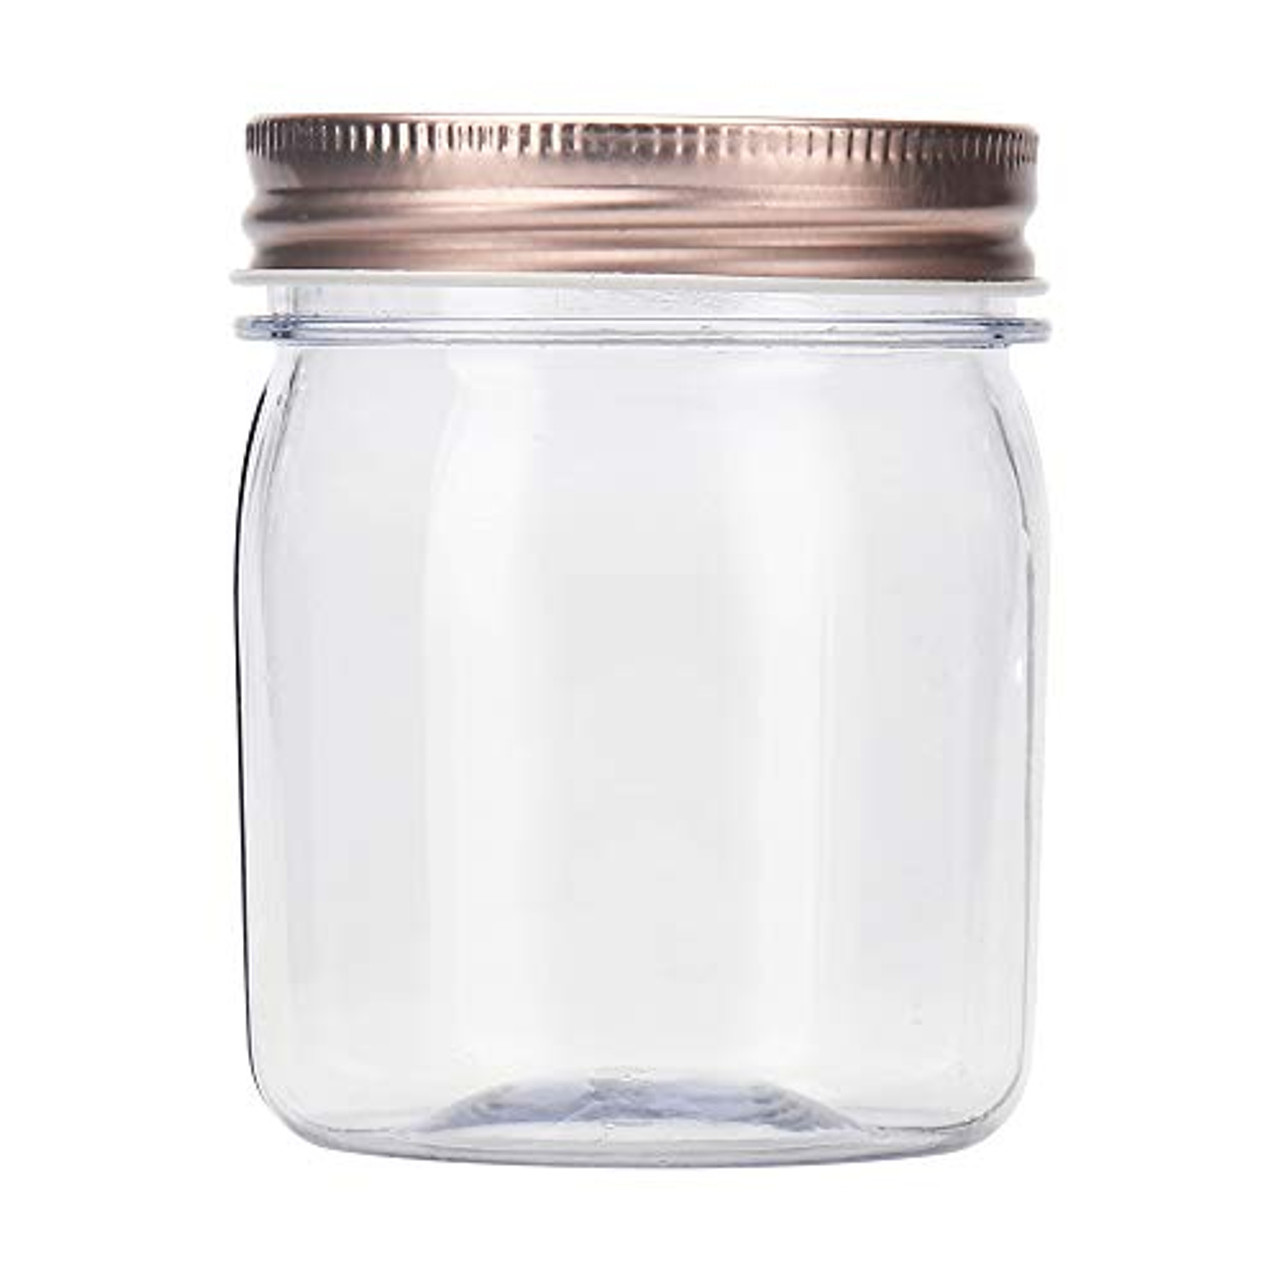 PIÑATAS OLE Glass Jar Small Transparent Air Tight Storage Jars - Pack of 2  - Gifts, Crosses, Rosaries, Chains and much more